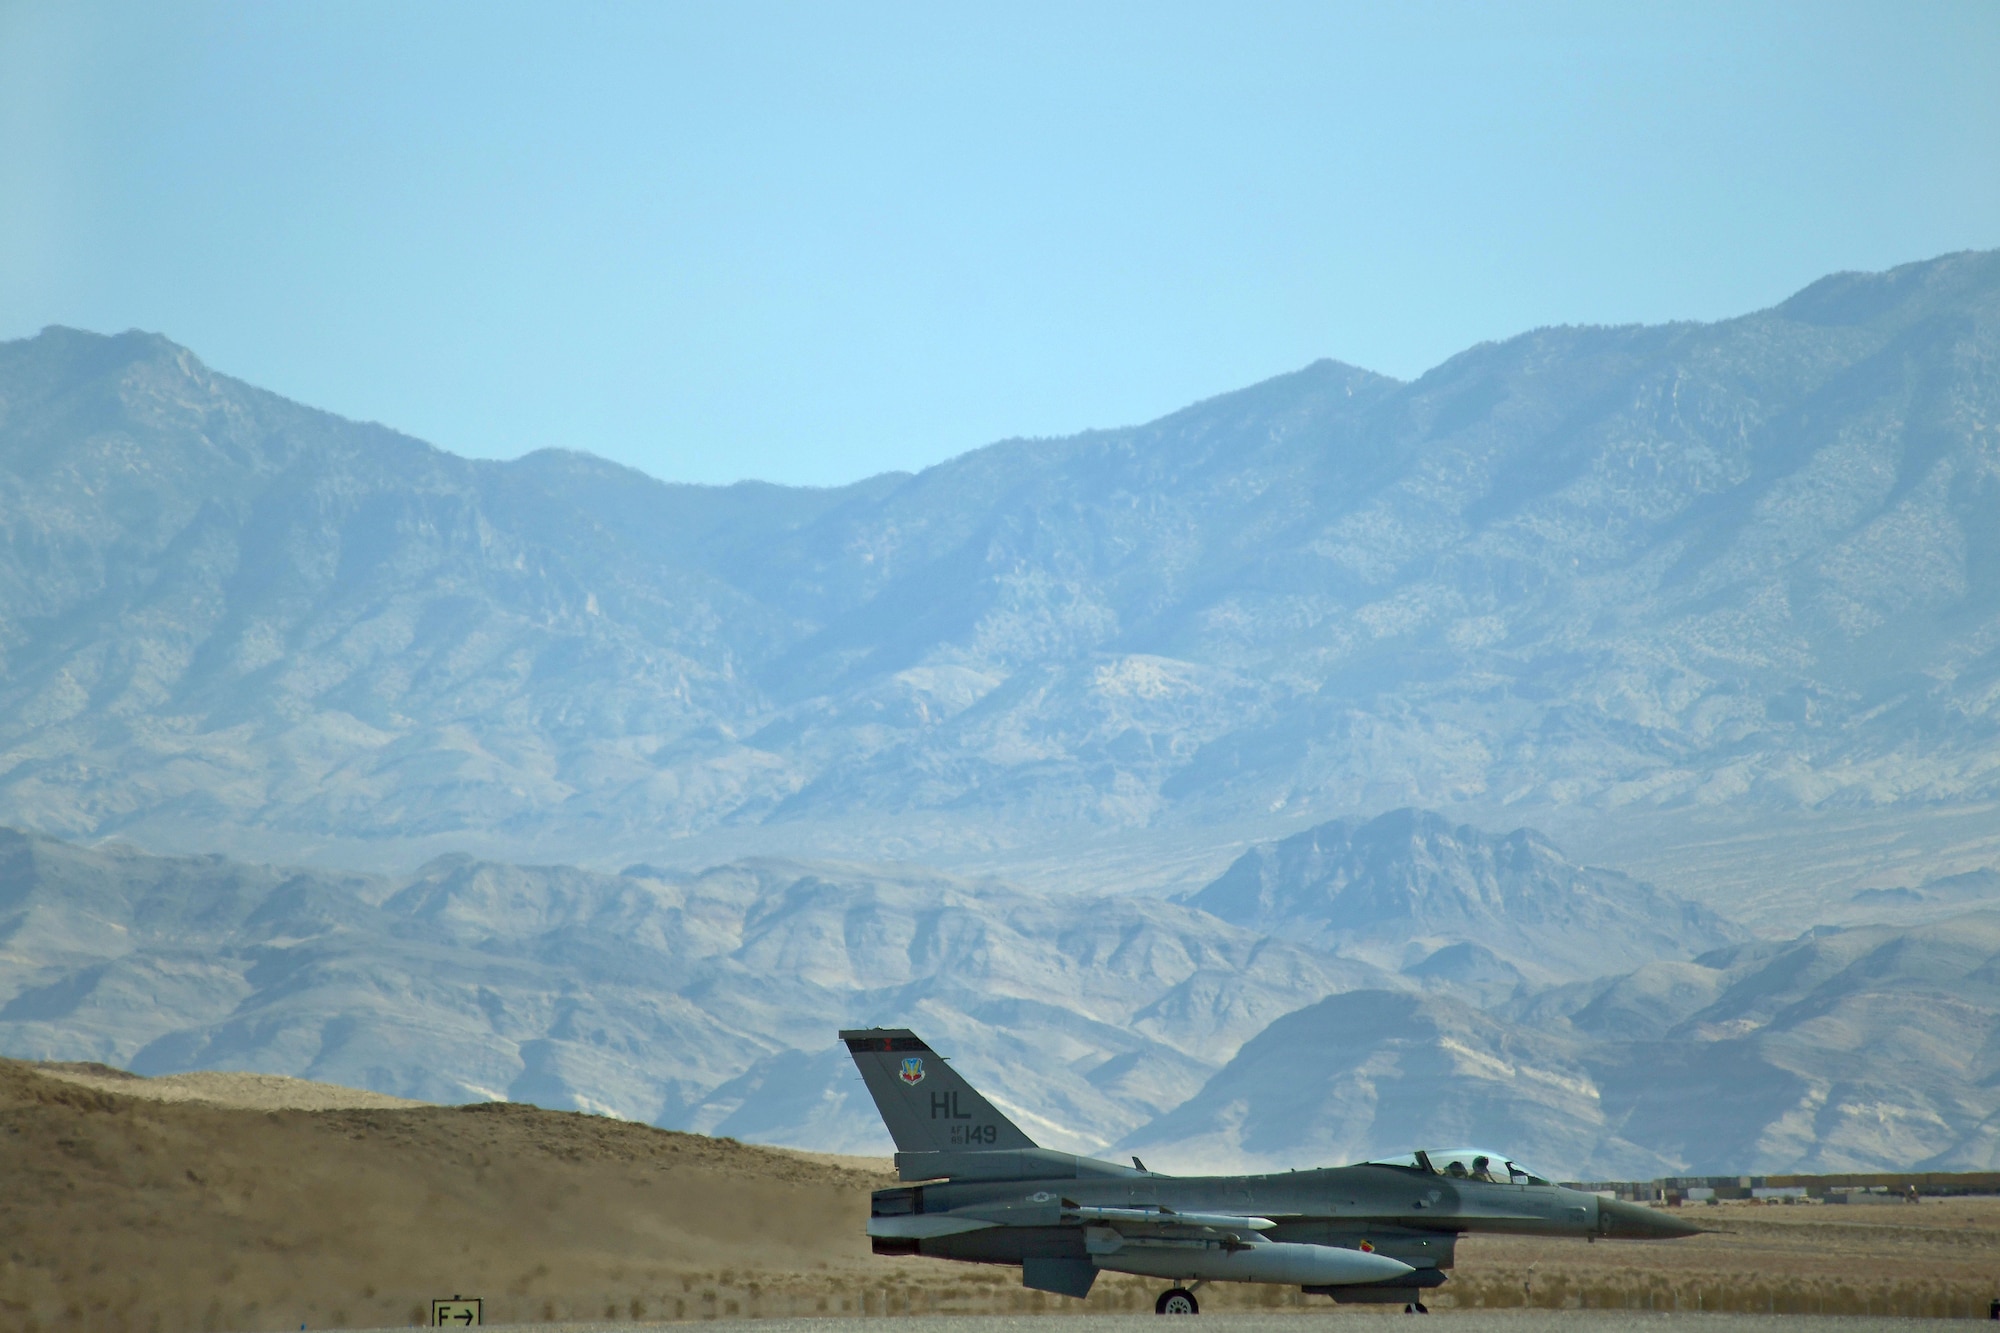 An F-16 Fighting Falcon taxis down the flightline Nov. 15, 2016, at Creech Air Force Base, Nev. Two F-16 pilots flew from Nellis AFB to Creech AFB to assist in the certification of the aircraft arresting system, a system used to rapidly slow down aircraft during emergency situations.  (U.S. Air Force photo by Airman 1st Class James Thompson)